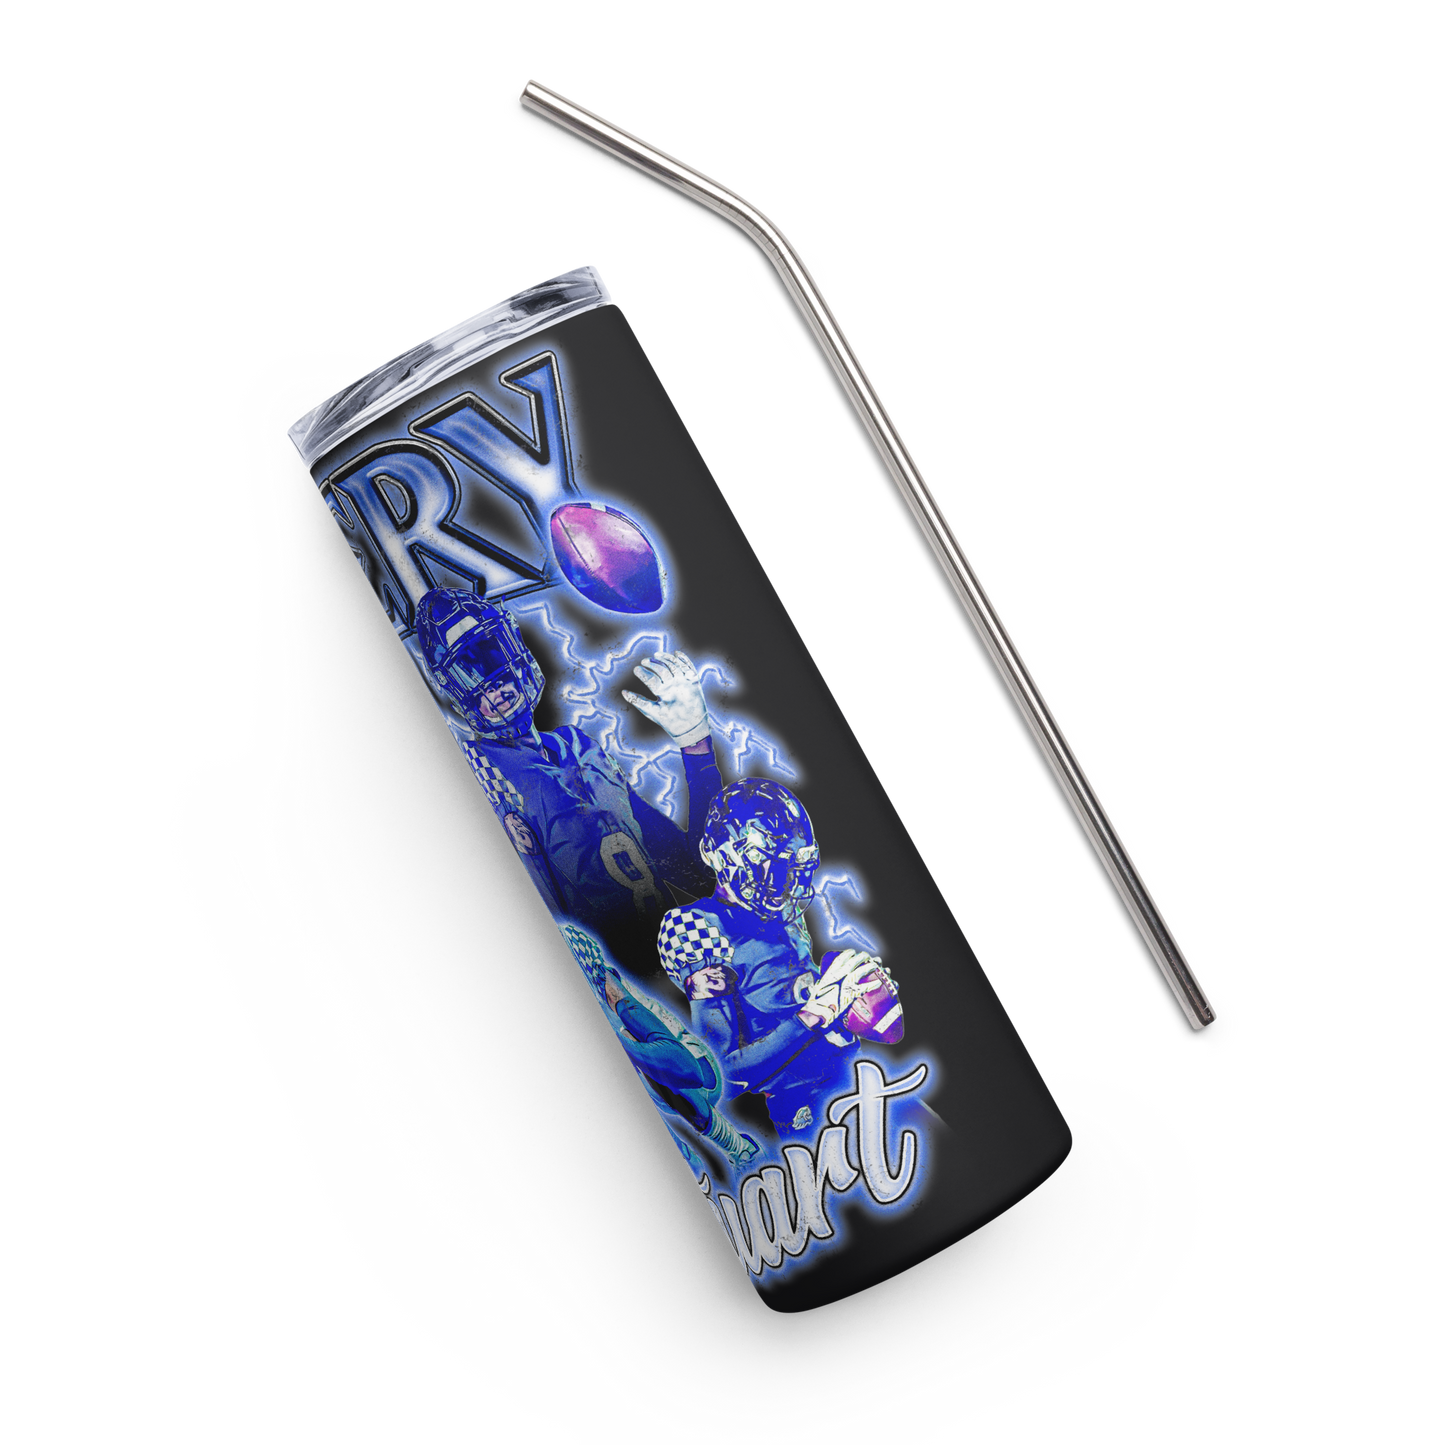 CHAOS STAINLESS STEEL TUMBLER